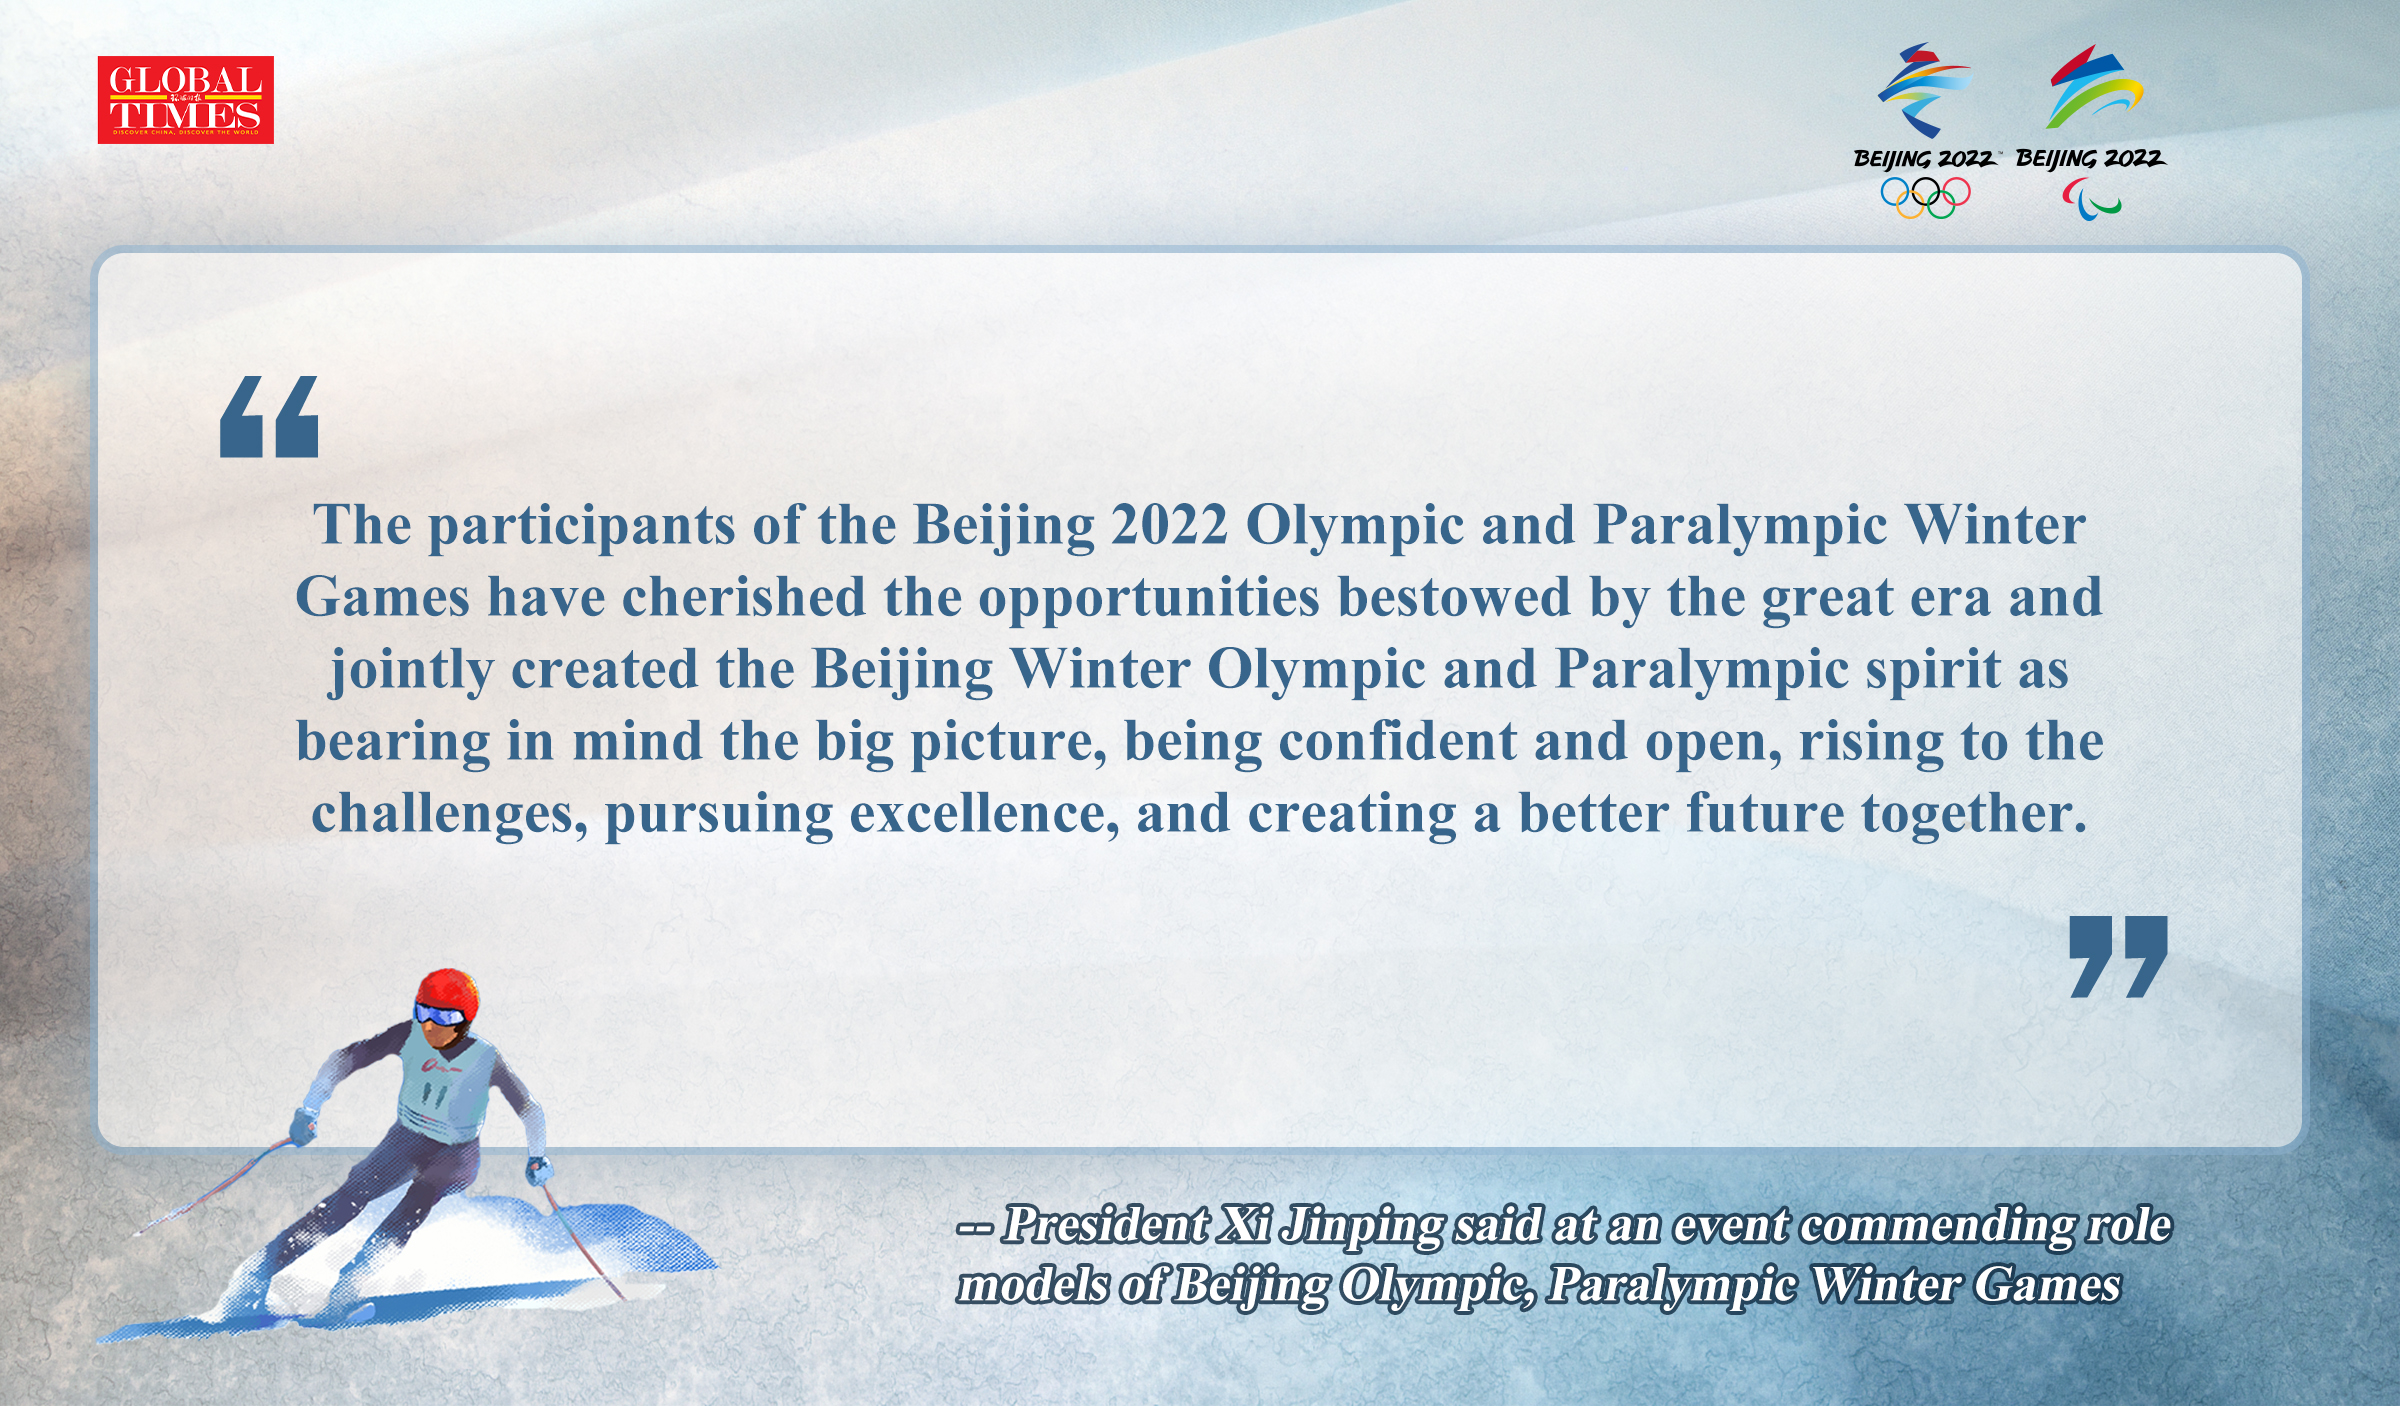 Highlights of Xi's speech at a gathering commending Beijing Olympic, Paralympic Winter Games role models. Graphic: GT